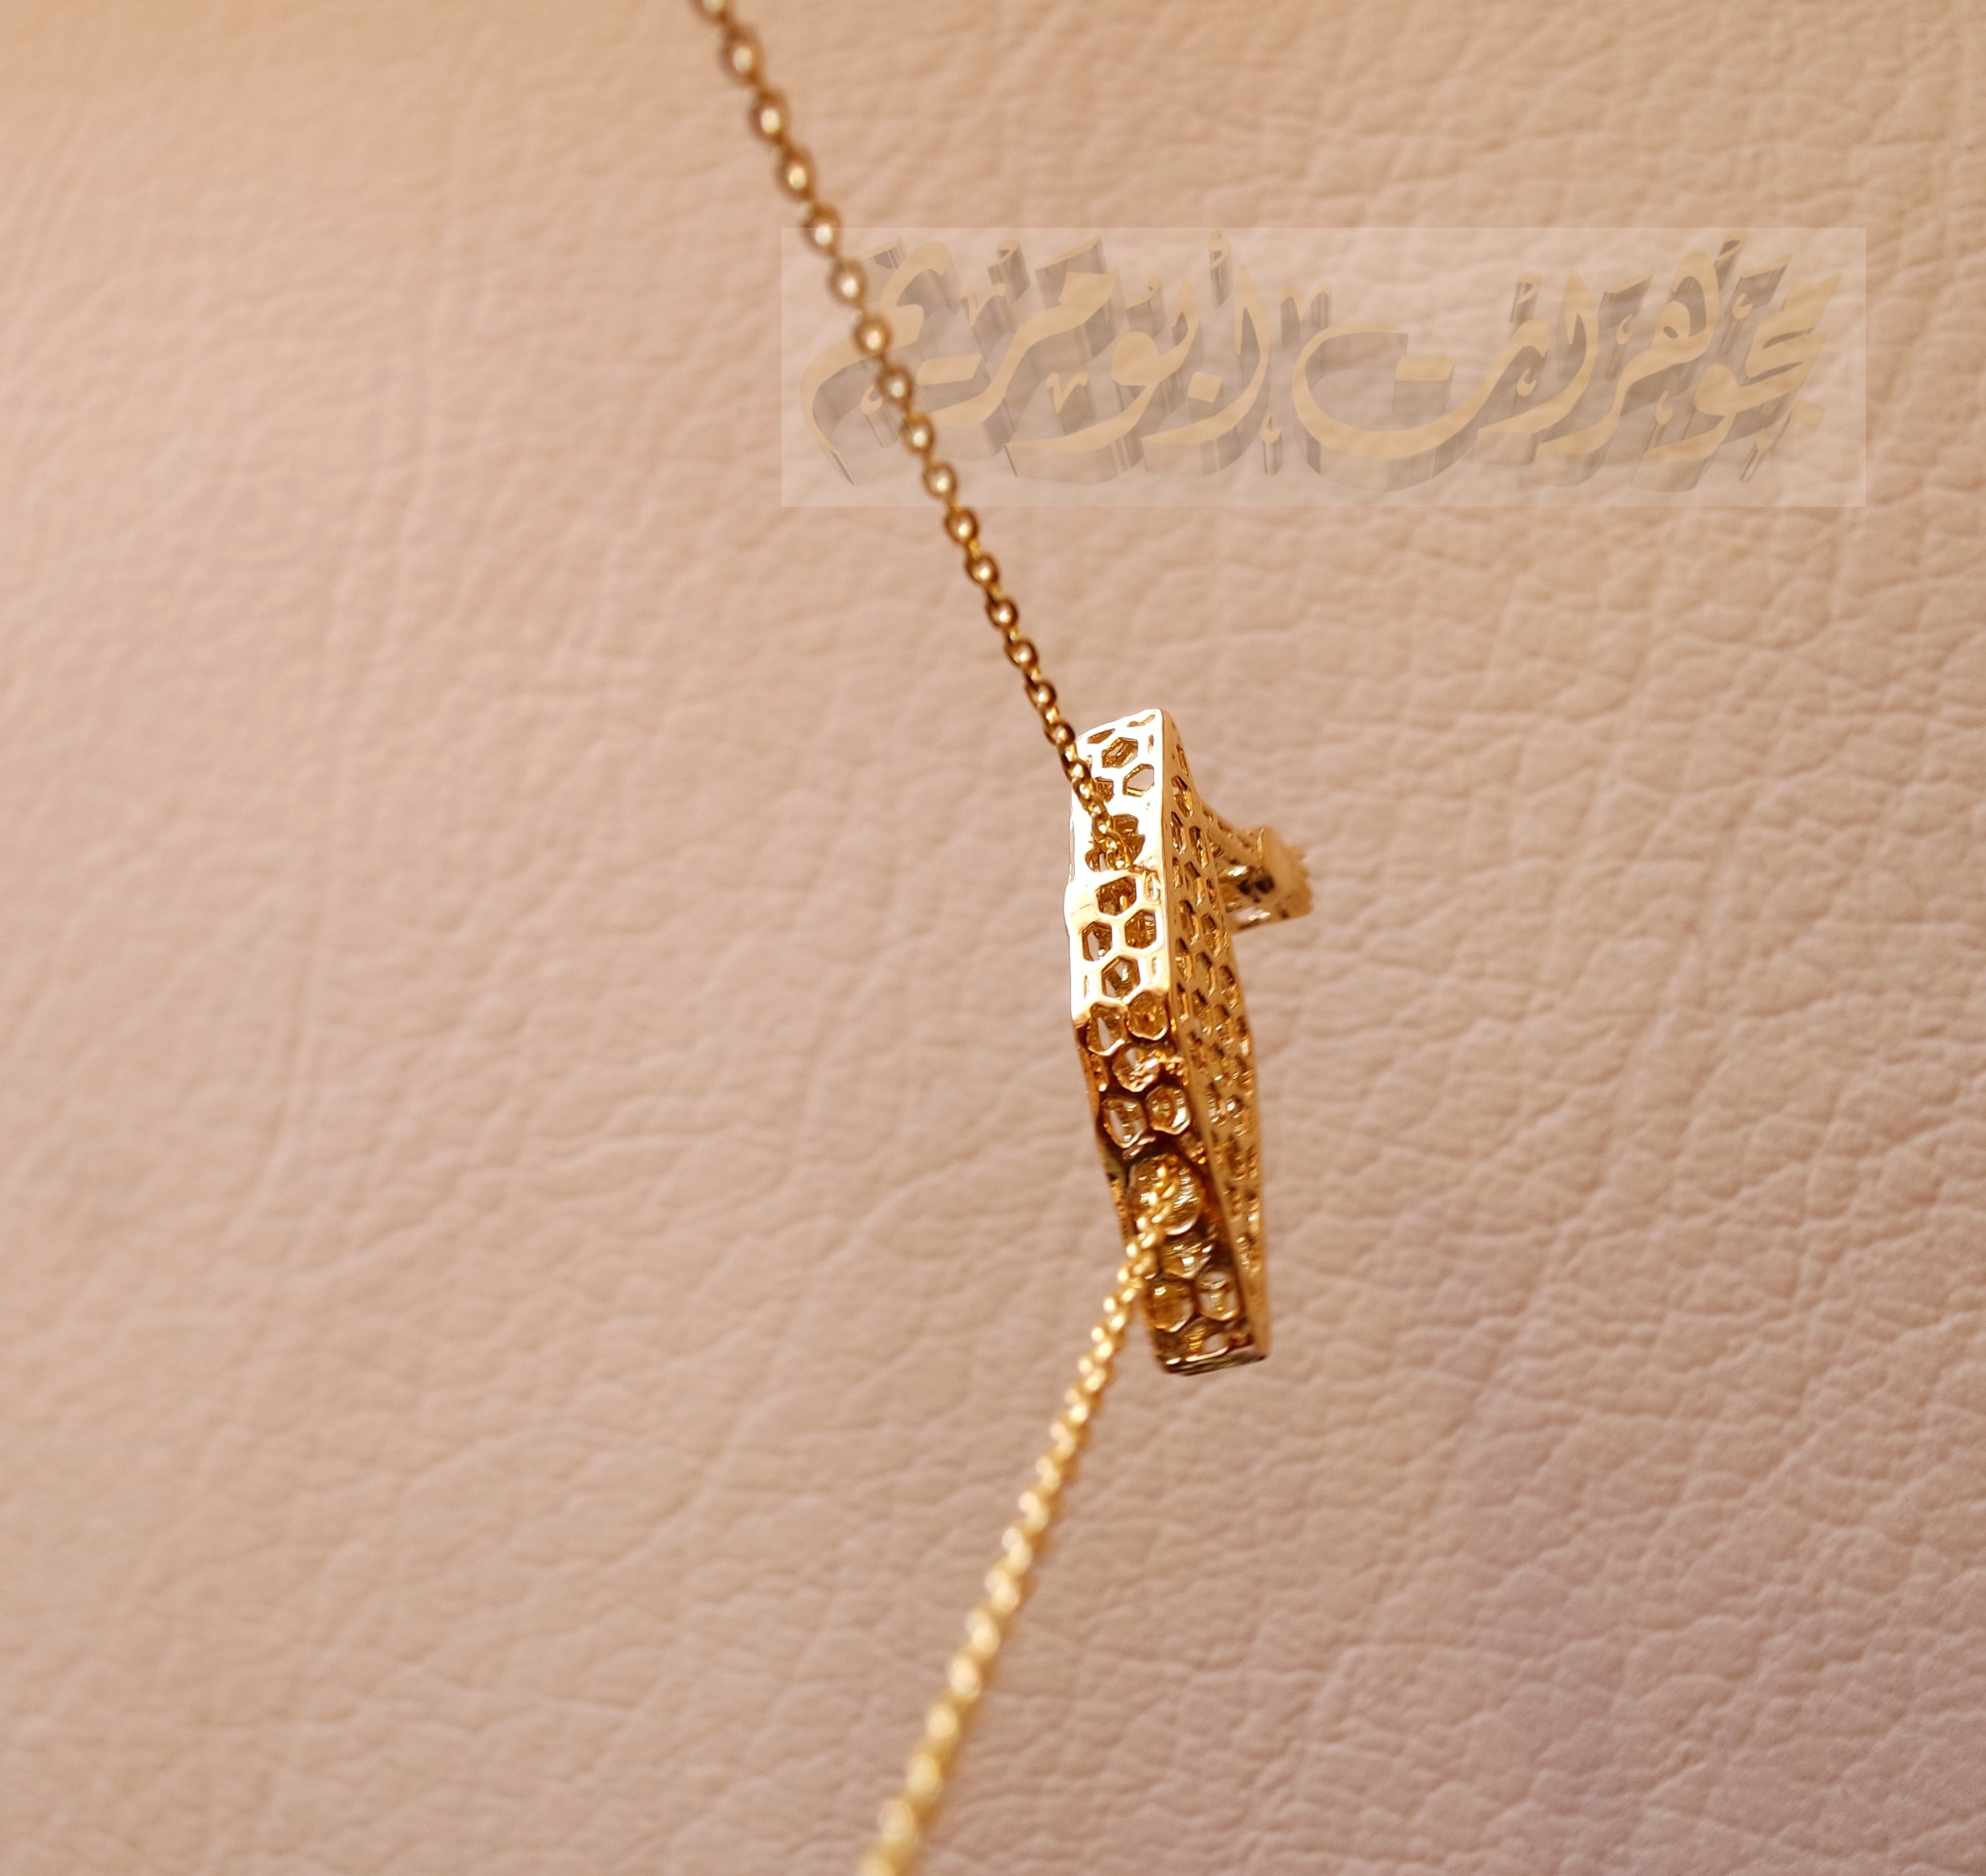 Honeycomb graduate hat cap graduation gift 3d 18K yellow gold necklace pendant and chain fine jewelry full insured shipping